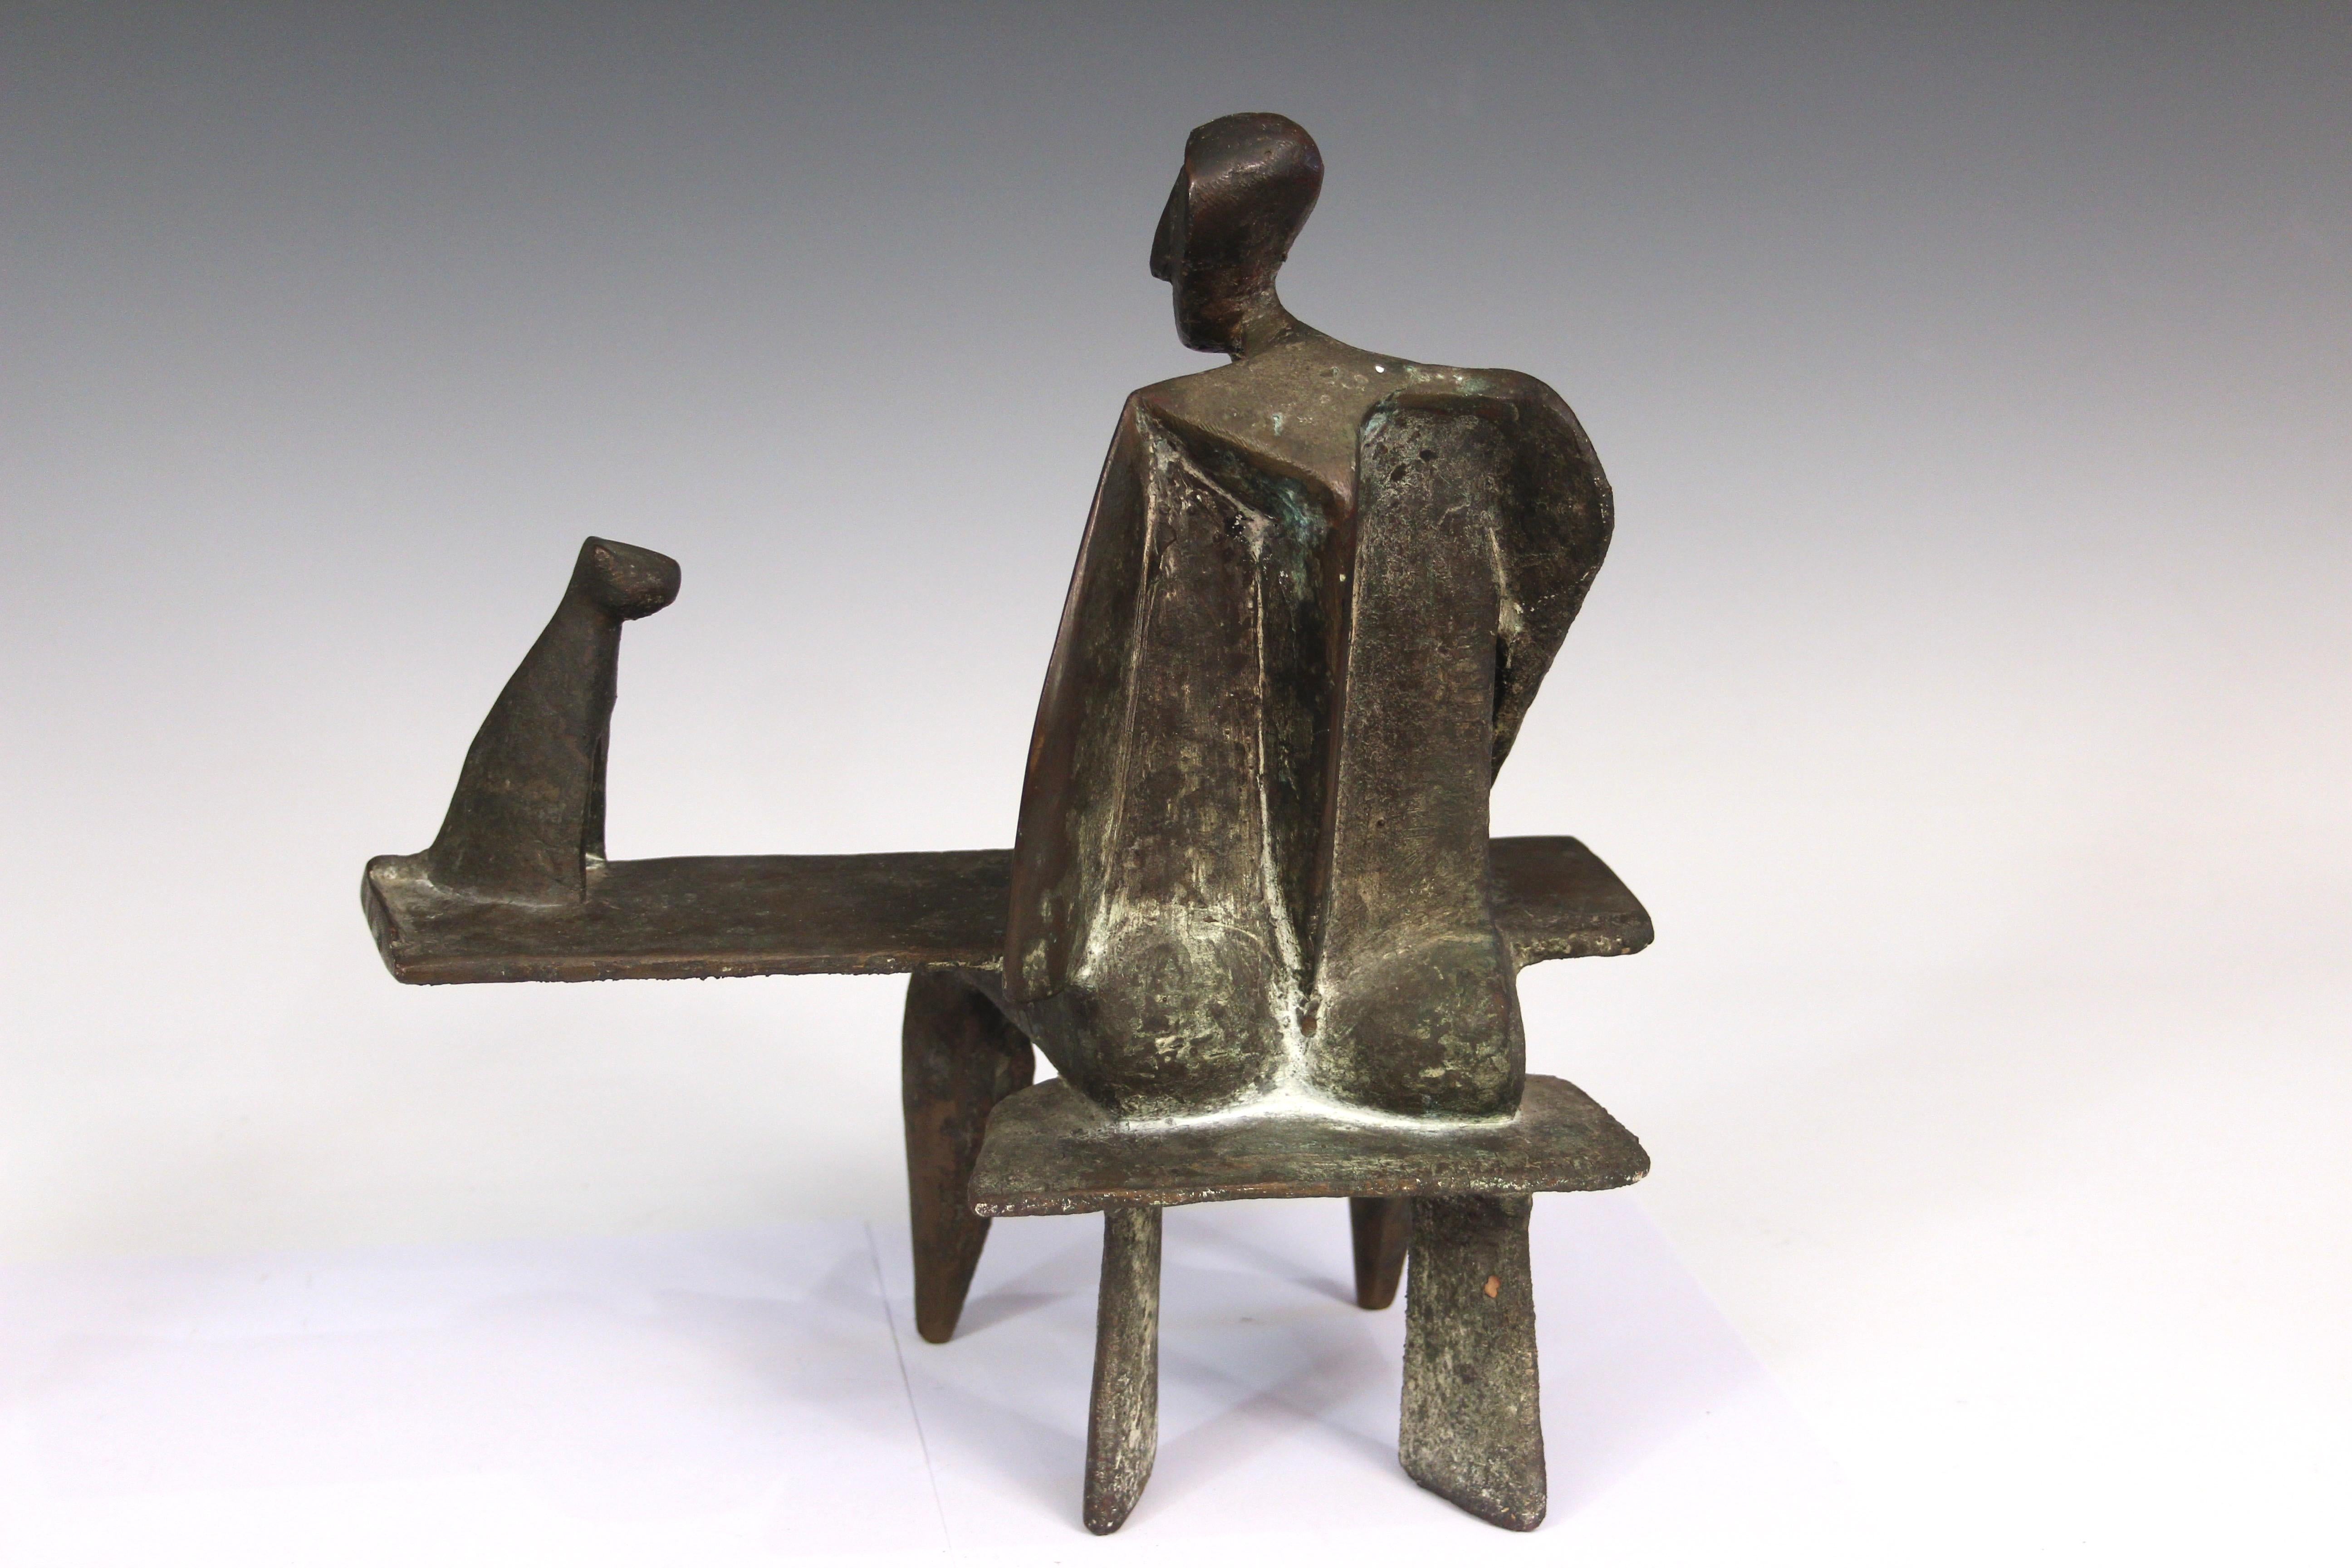 Karl Reidel (German 1927-2006) bronze sculpture of a man sitting at a table with a cat. Signed 